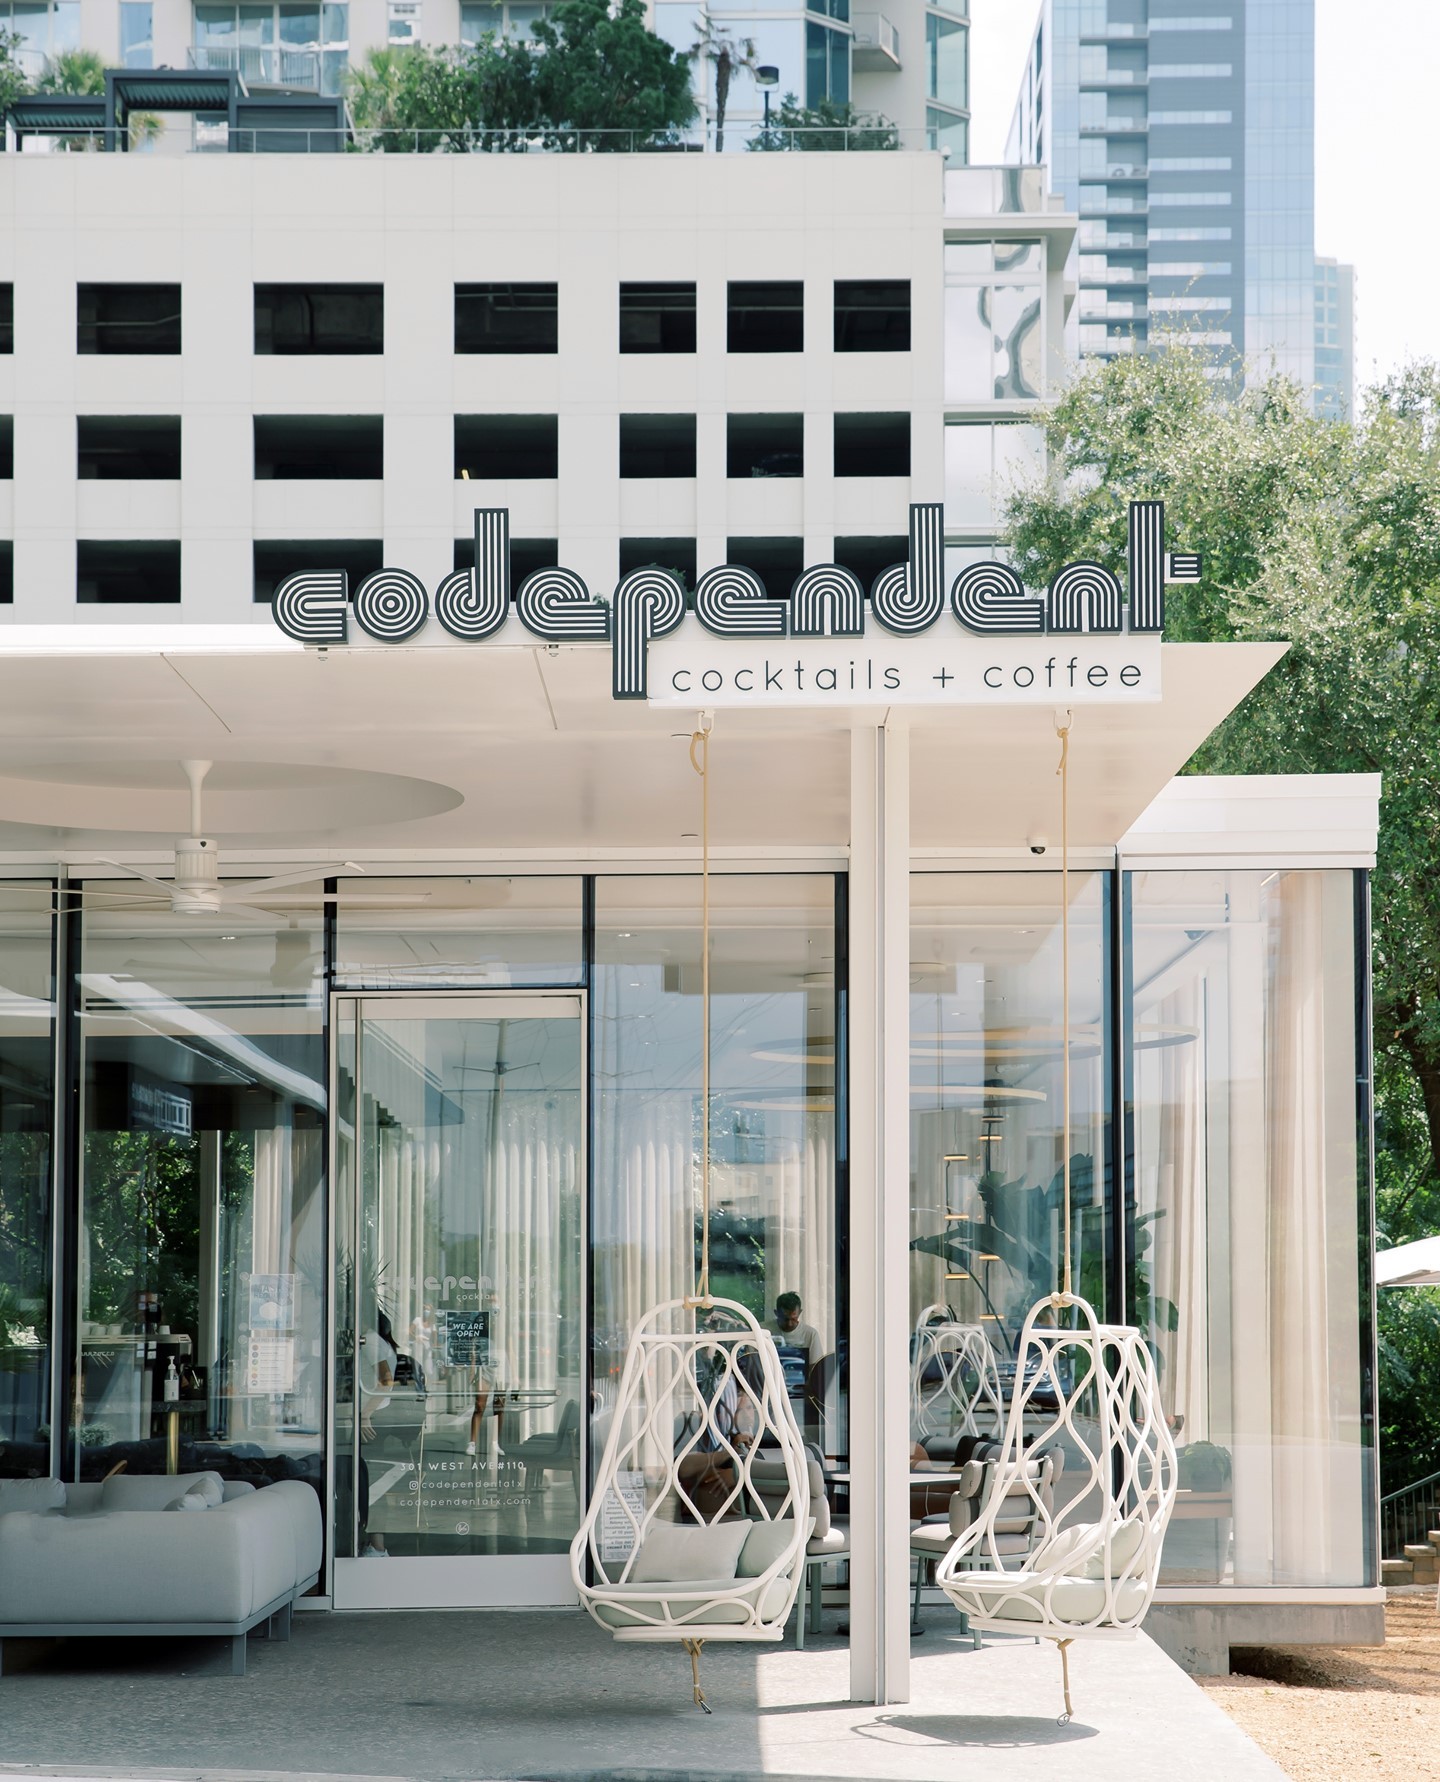 Where else can you sip a cocktail on a swing while overlooking the Austin skyline? ⁠
⁠
Head over to @codependant and experience this unique space by @michaelwesandco